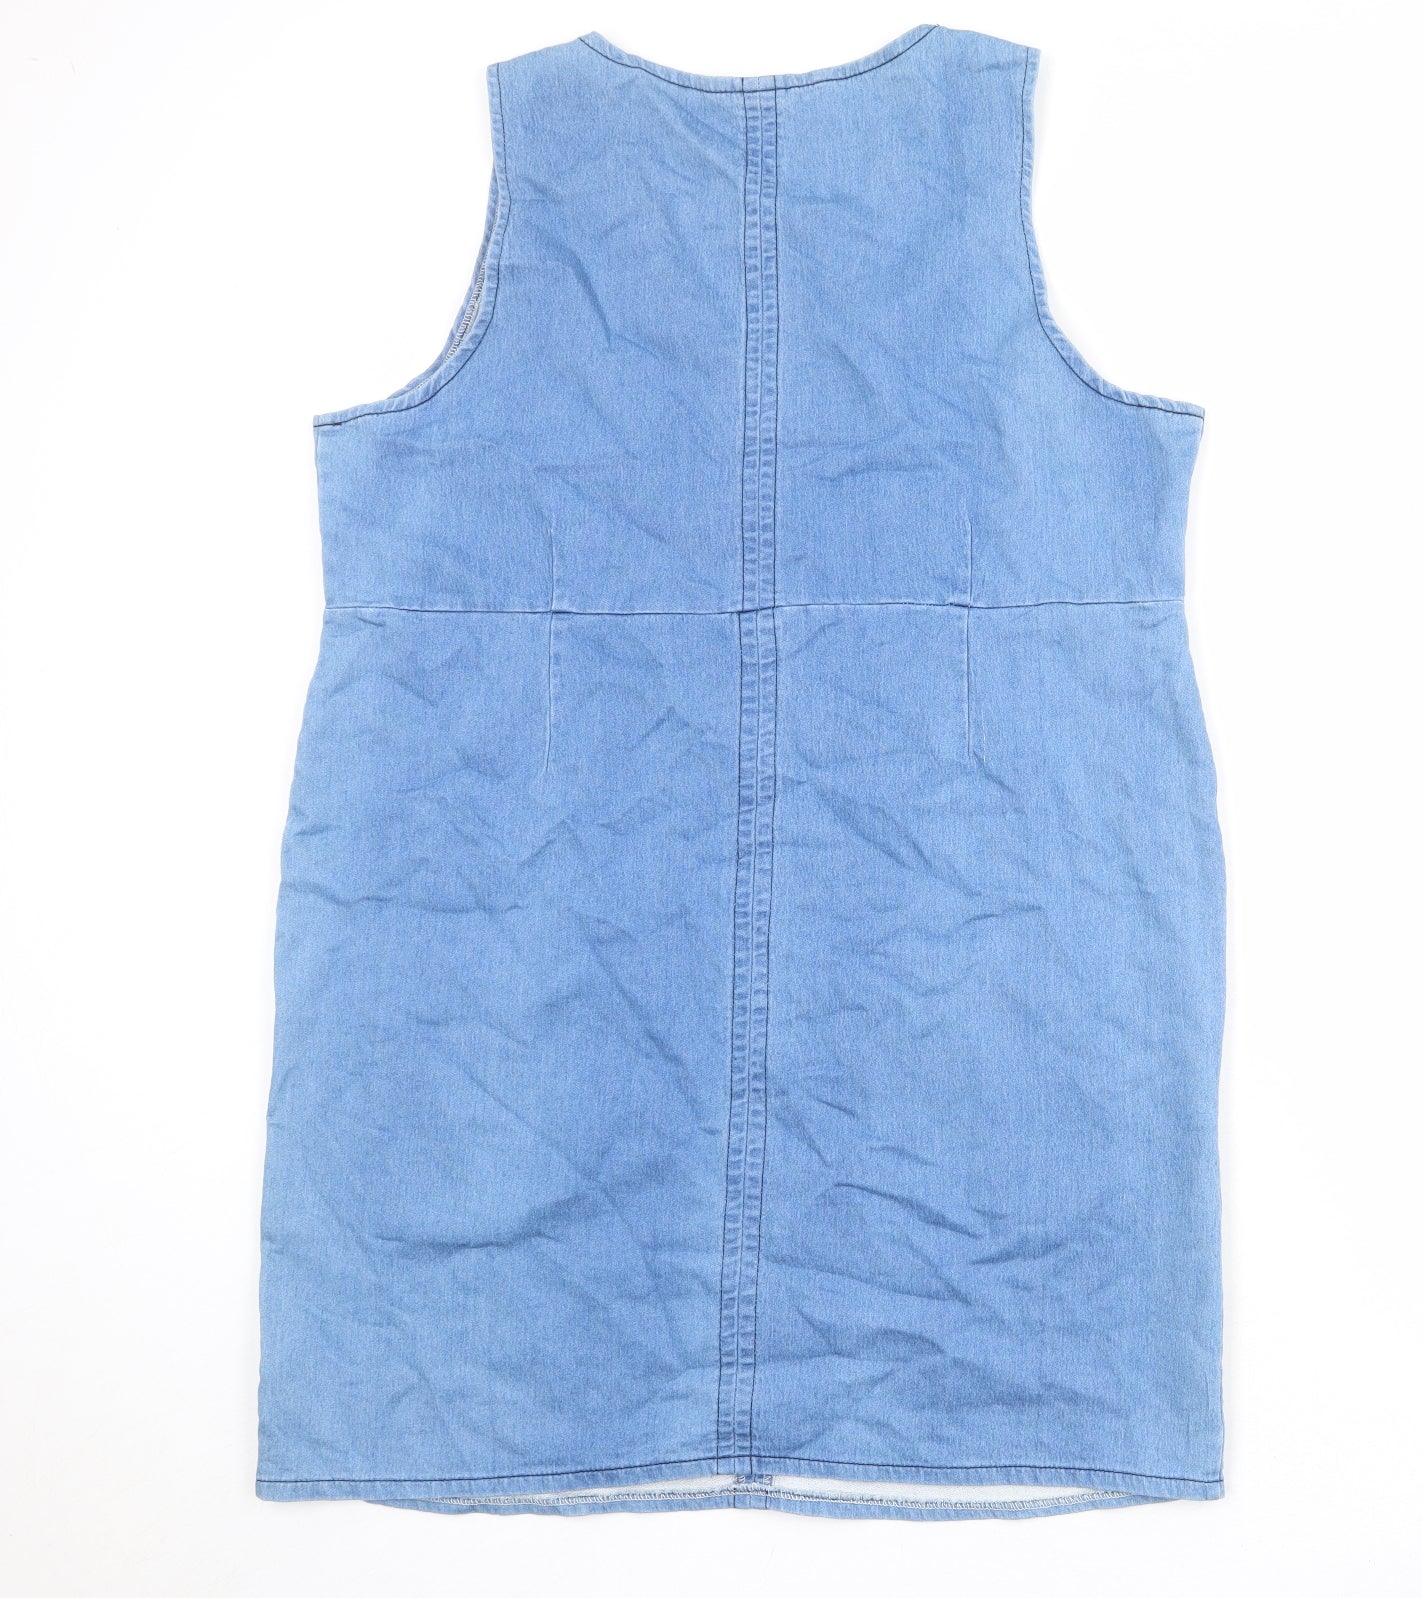 Cotton Traders Womens Blue Cotton Pinafore/Dungaree Dress Size 14 V-Neck Pullover